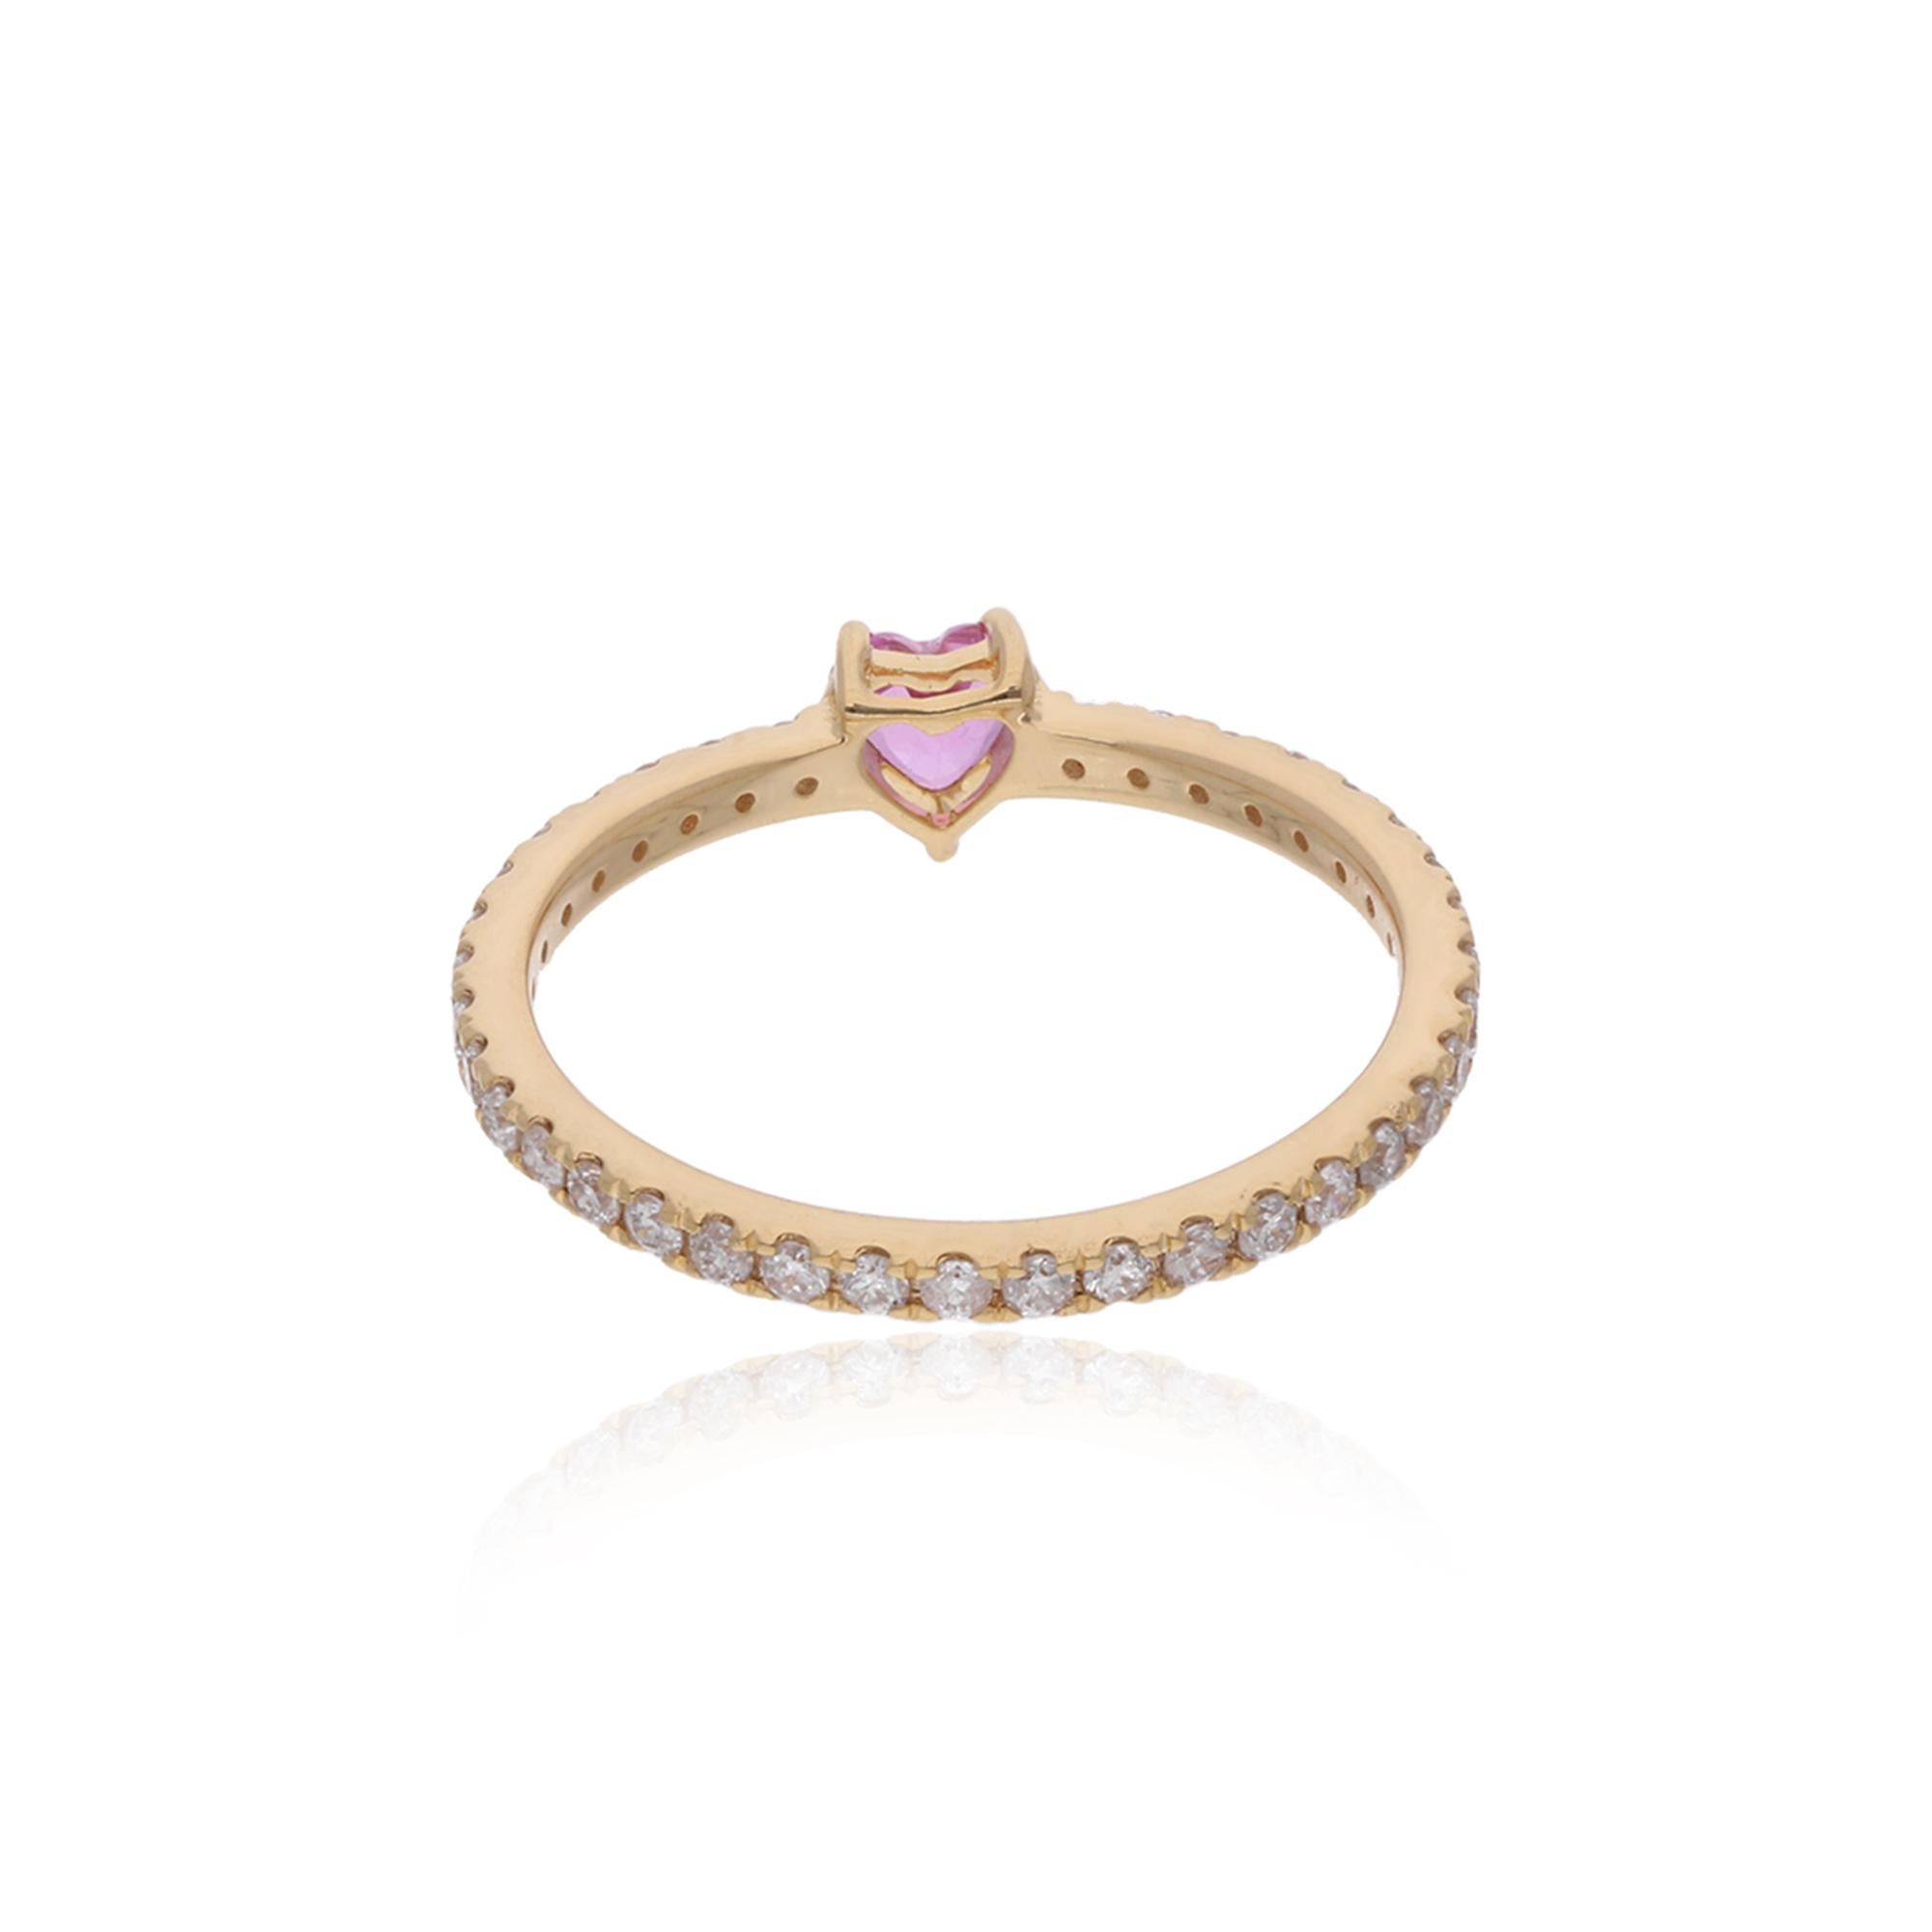 Item Code :- SFR-2030K
Gross Wt. :- 1.31 gm
14k Yellow Gold Wt. :- 1.18 gm
Natural Diamond Wt. :- 0.40 Ct.  ( AVERAGE DIAMOND CLARITY SI1-SI2 & COLOR H-I )
Pink Gemstone Wt. :- 0.27 Ct.
Ring Size :- 7 US & All size available

✦